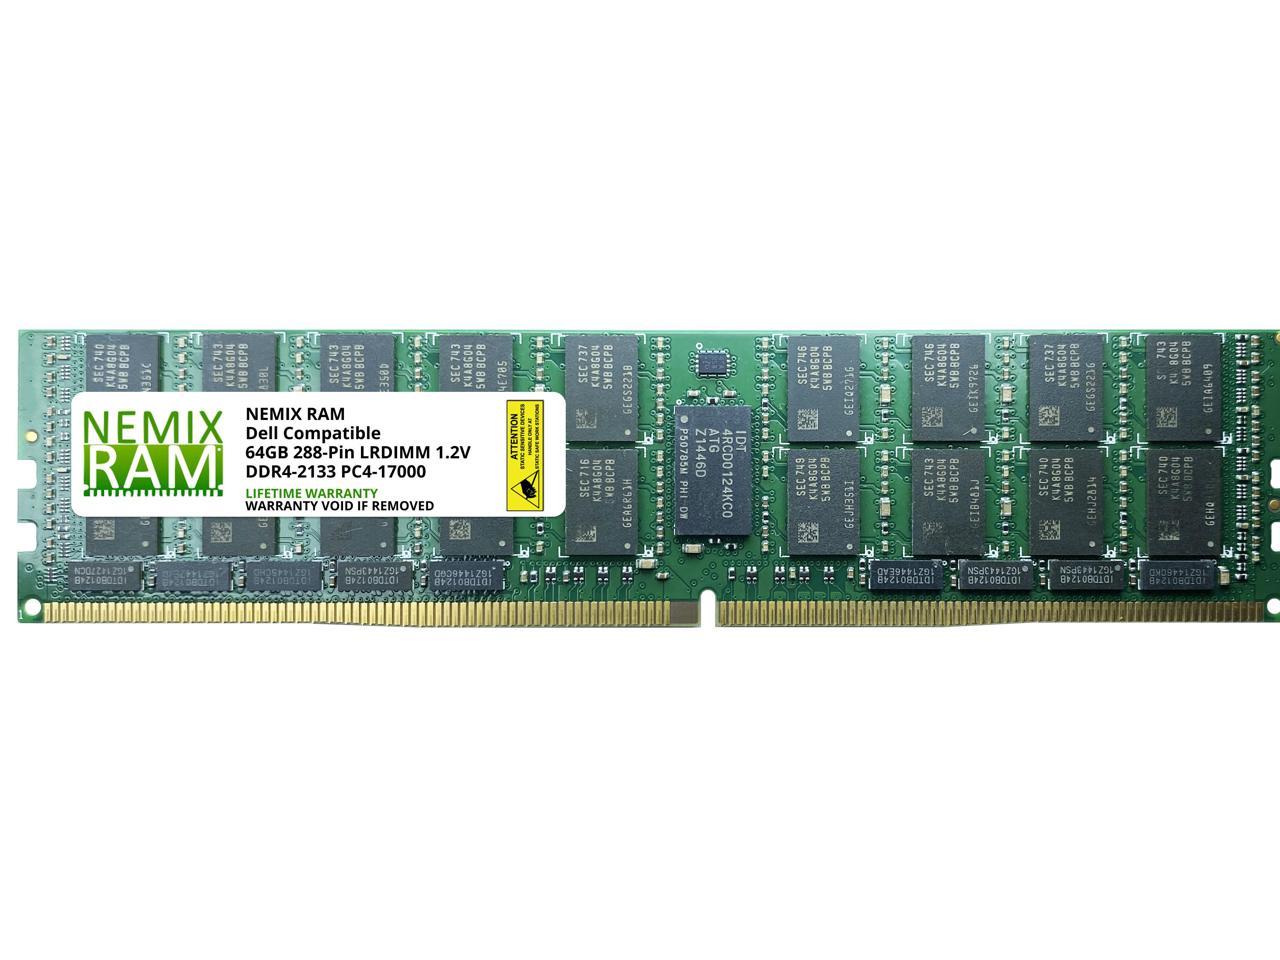 NEMIX RAM 64GB DDR4-2133 PC4-17000 Replacement for DELL SNP03VMYC/64G  A8451131